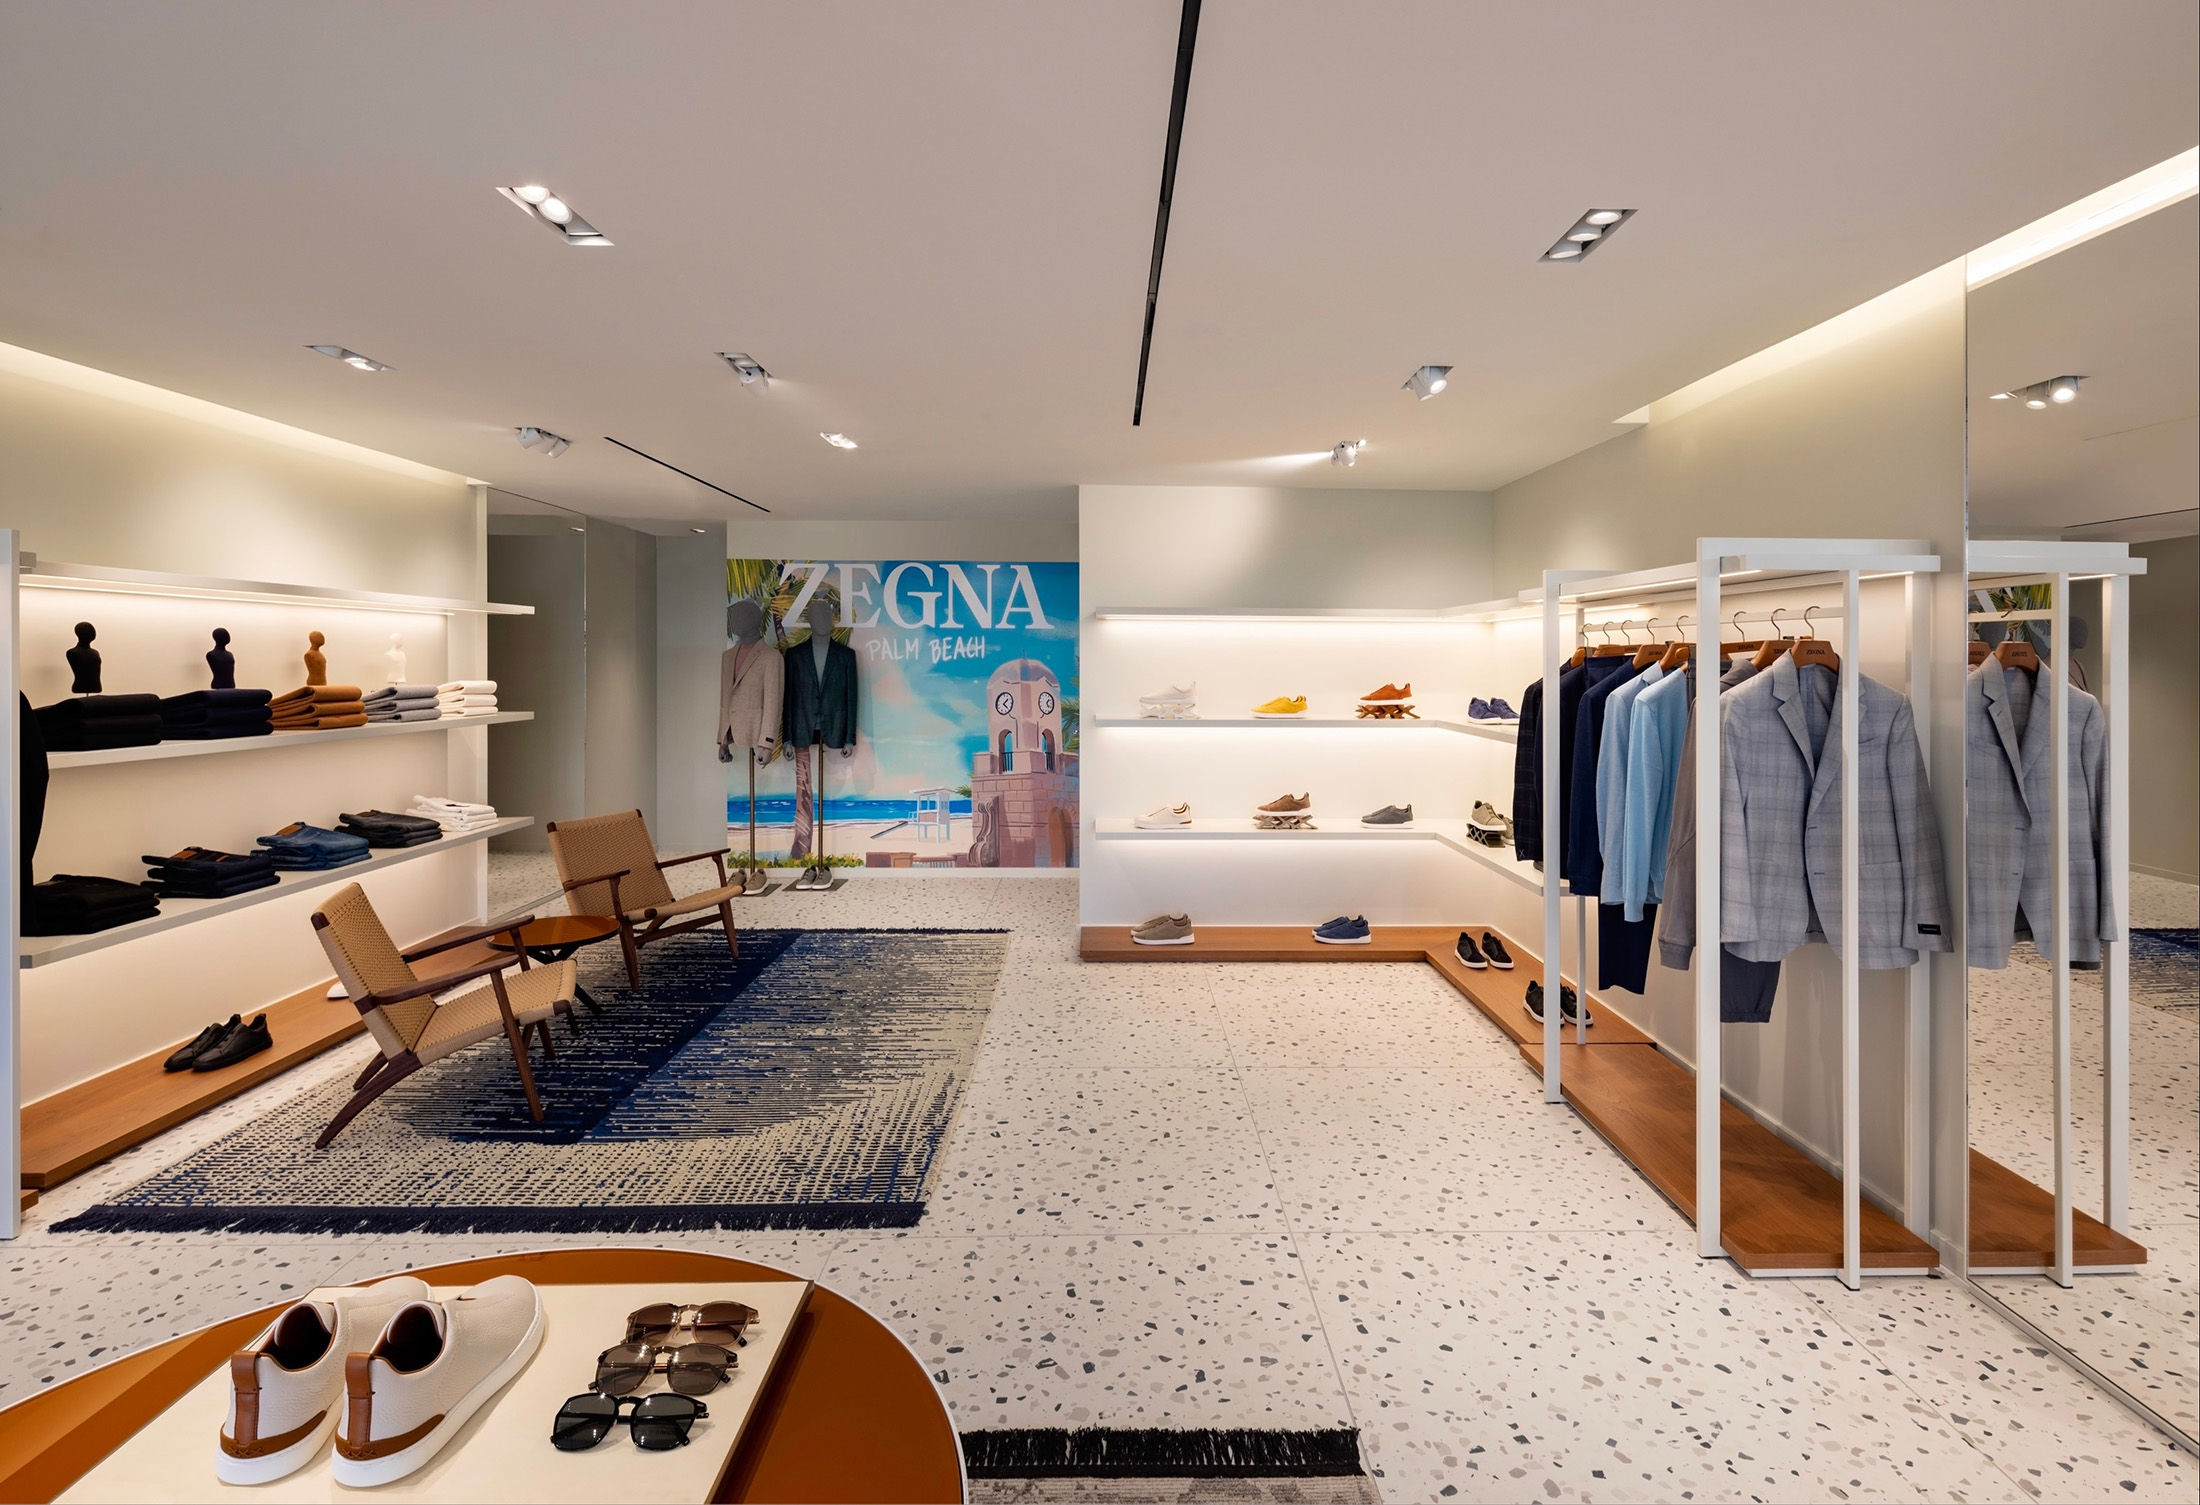 ZEGNA Opens New Temporary Store in East Hampton, Setting a New